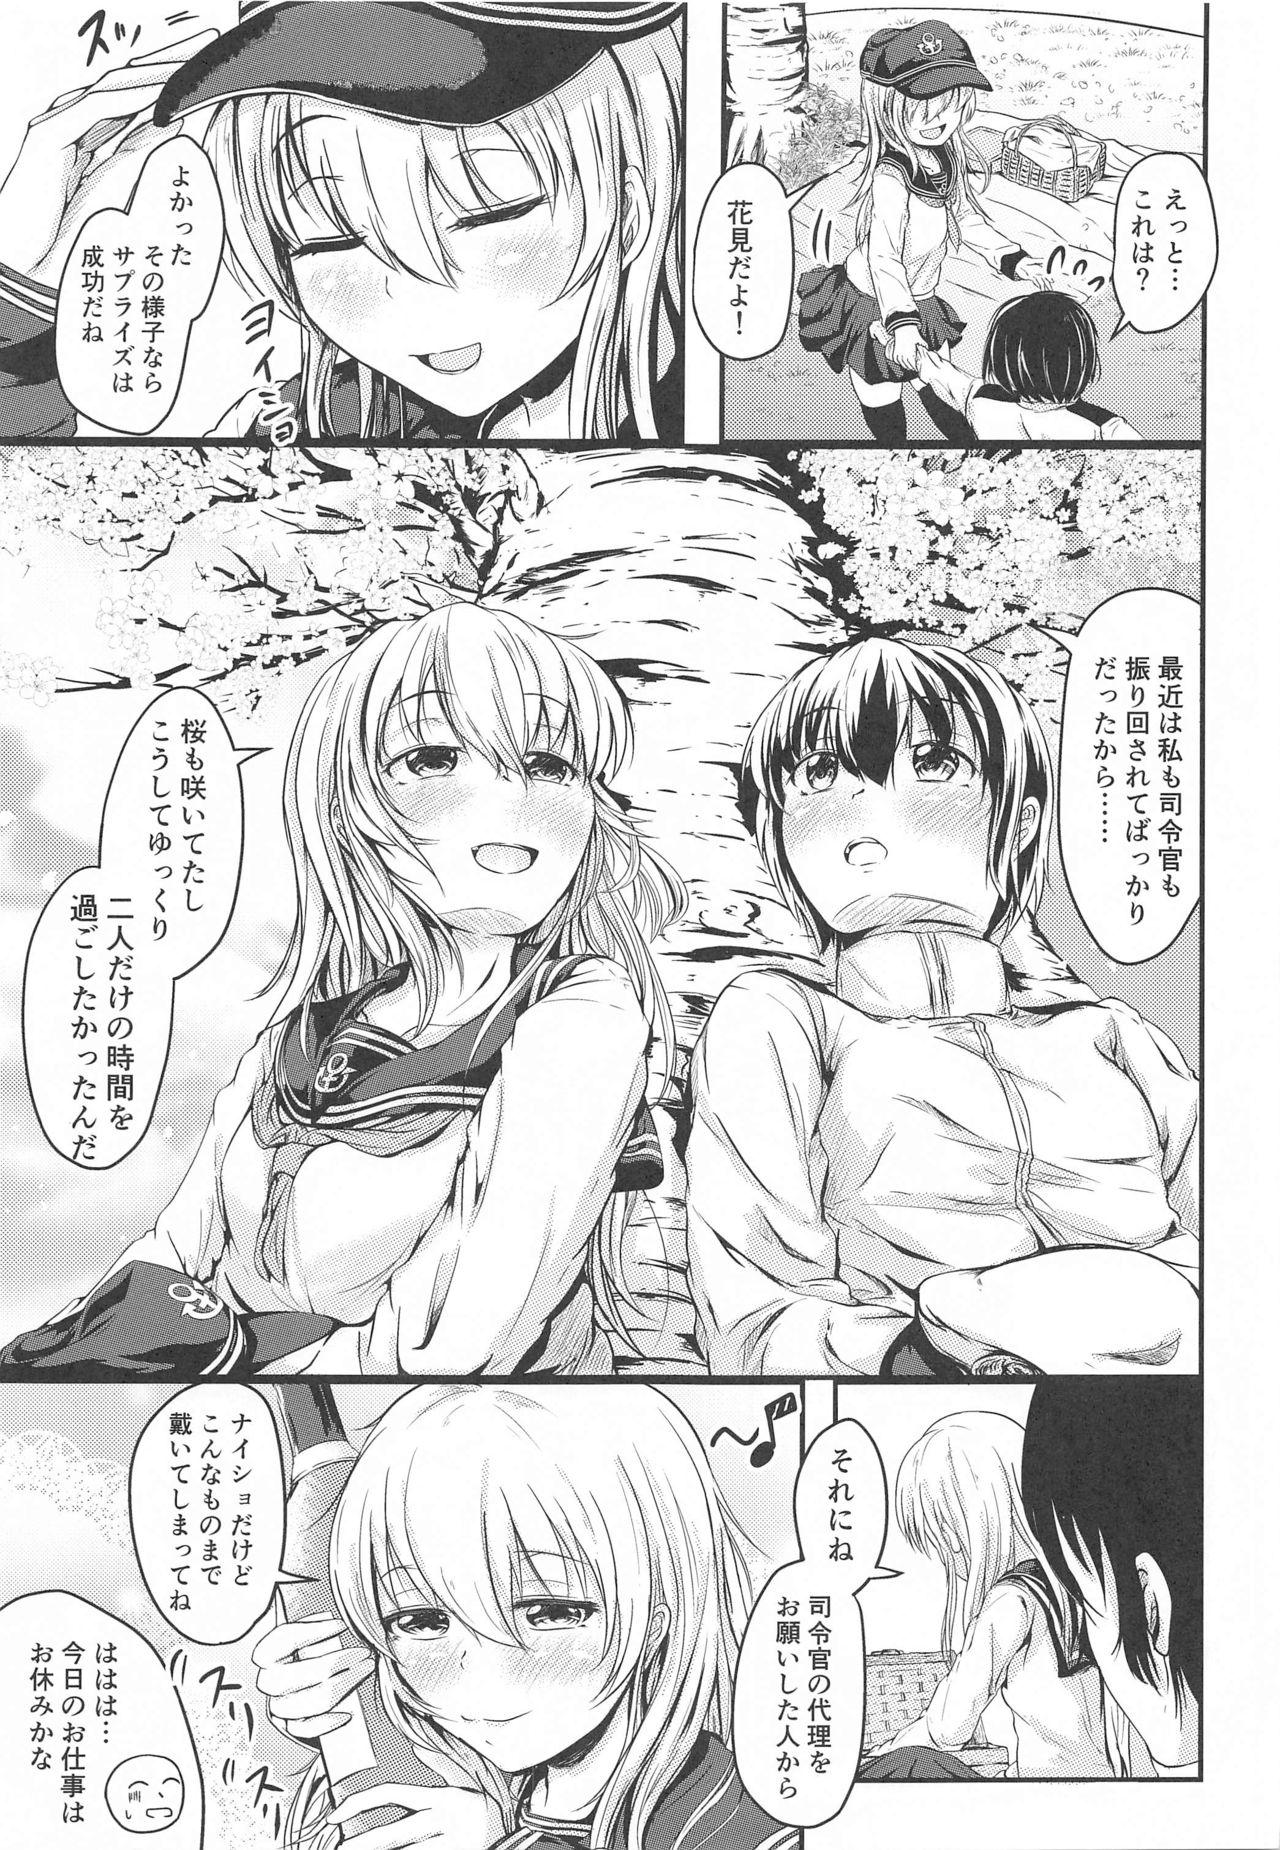 Hot Cunt Hibiki datte Onee-chan 3 - Kantai collection Venezolana - Page 6